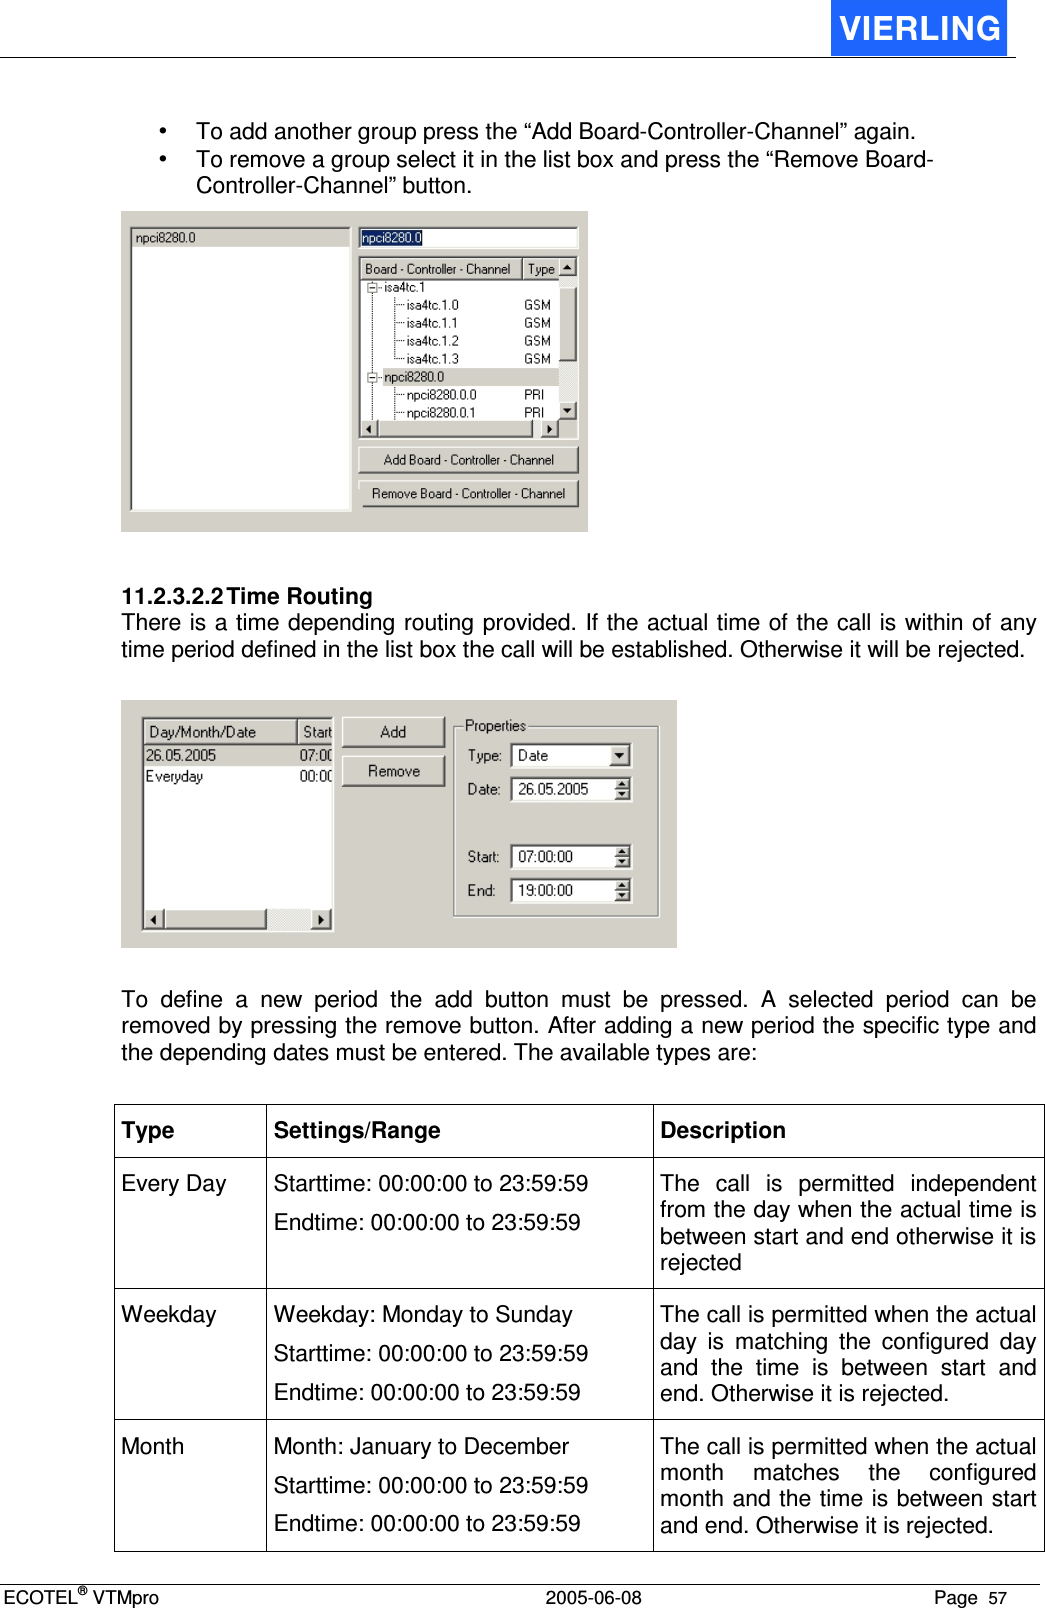 ECOTEL® VTMpro  2005-06-08 Page  57    • To add another group press the “Add Board-Controller-Channel” again. • To remove a group select it in the list box and press the “Remove Board-Controller-Channel” button.   11.2.3.2.2 Time Routing There is a time depending routing provided. If the actual time of the call is within of any time period defined in the list box the call will be established. Otherwise it will be rejected.    To  define  a  new  period  the  add  button  must  be  pressed.  A  selected  period  can  be removed by pressing the remove button. After adding a new period the specific type and the depending dates must be entered. The available types are:  Type  Settings/Range  Description Every Day  Starttime: 00:00:00 to 23:59:59 Endtime: 00:00:00 to 23:59:59 The  call  is  permitted  independent from the day when the actual time is between start and end otherwise it is rejected Weekday  Weekday: Monday to Sunday Starttime: 00:00:00 to 23:59:59 Endtime: 00:00:00 to 23:59:59 The call is permitted when the actual day  is  matching  the  configured  day and  the  time  is  between  start  and end. Otherwise it is rejected. Month  Month: January to December Starttime: 00:00:00 to 23:59:59 Endtime: 00:00:00 to 23:59:59 The call is permitted when the actual month  matches  the  configured month and the time is between start and end. Otherwise it is rejected. 